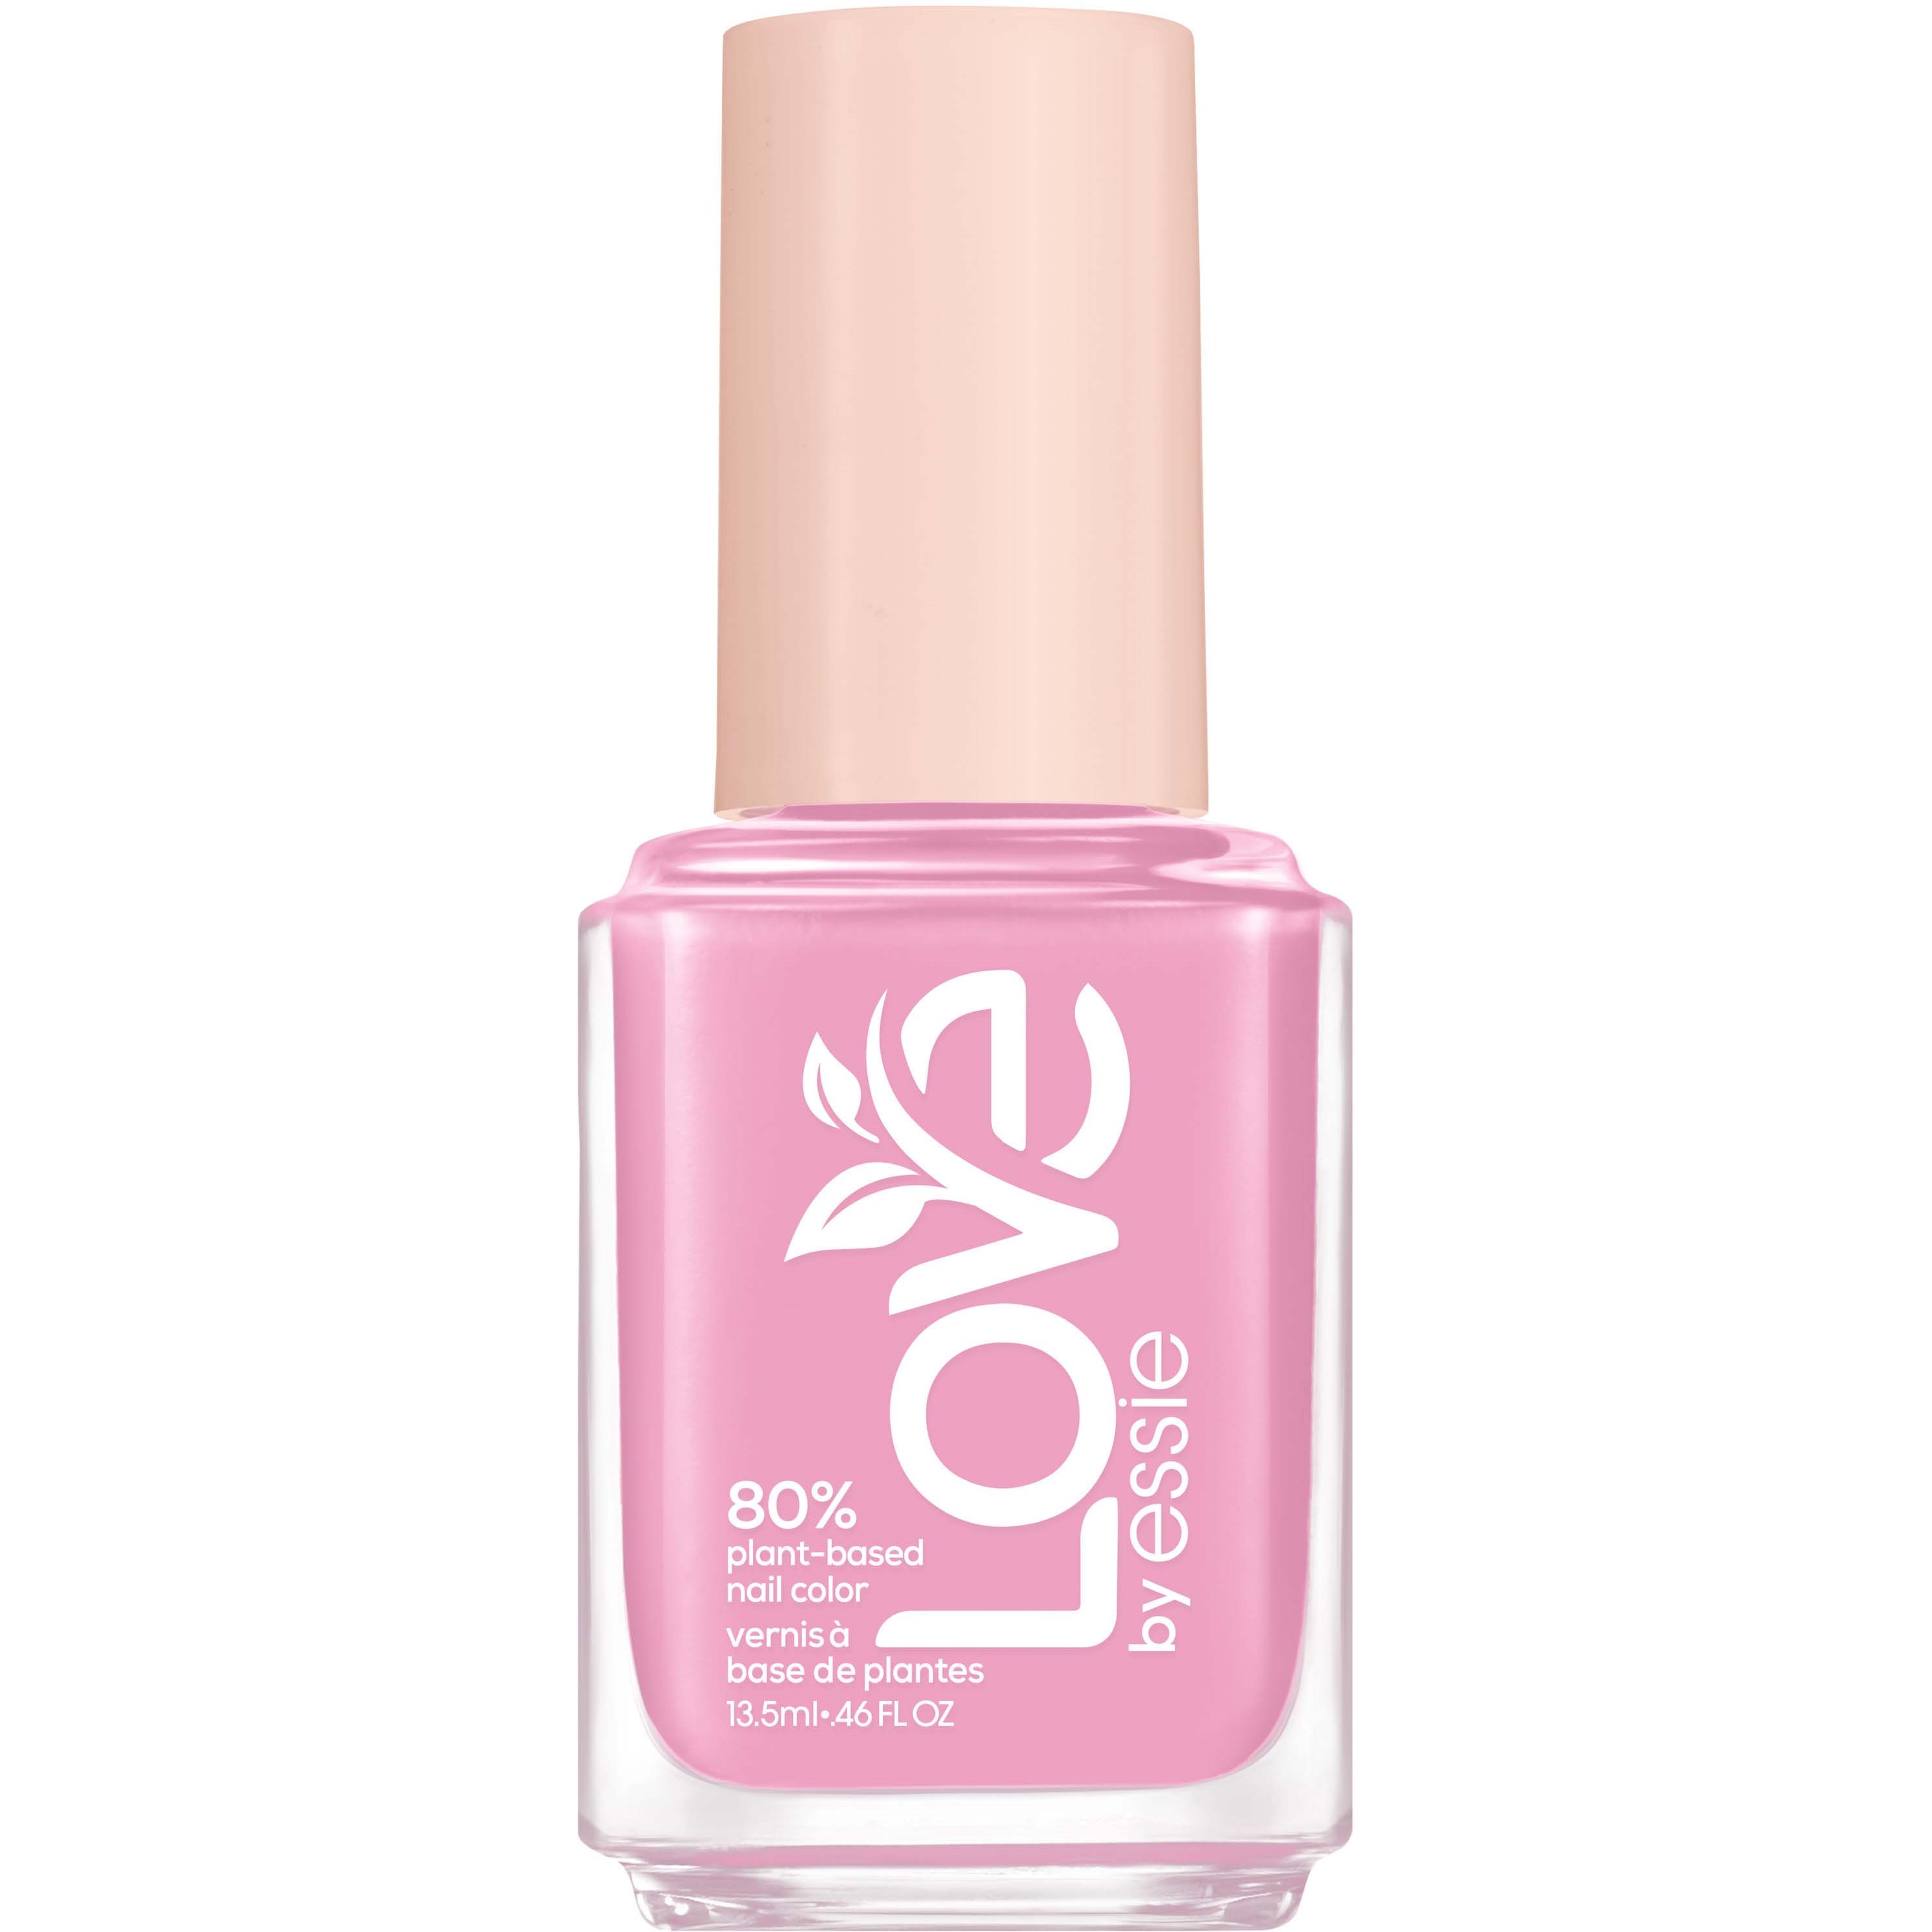 Bilde av Essie Love By Essie 80% Plant-based Nail Color 160 Carefree But Caring